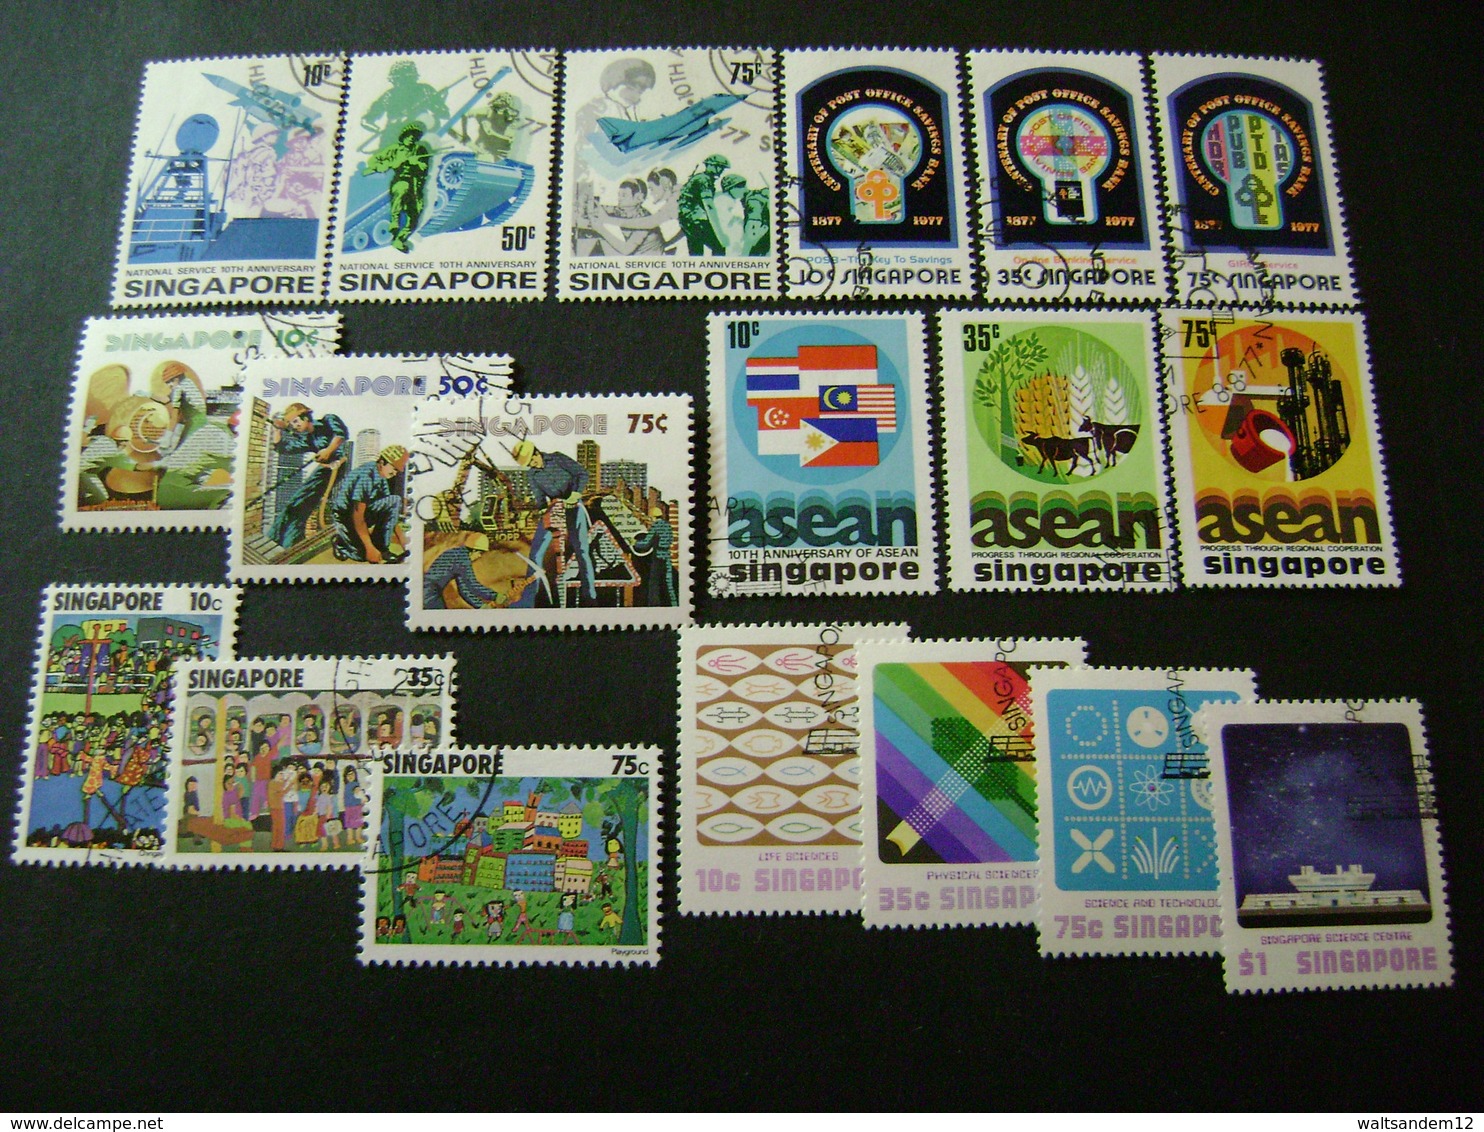 Singapore 1977 And 1978 Commemorative/special Issues (SG 286-288, 302-313, 315-342) 2 Images - Used [Sale Price] - Singapore (1959-...)